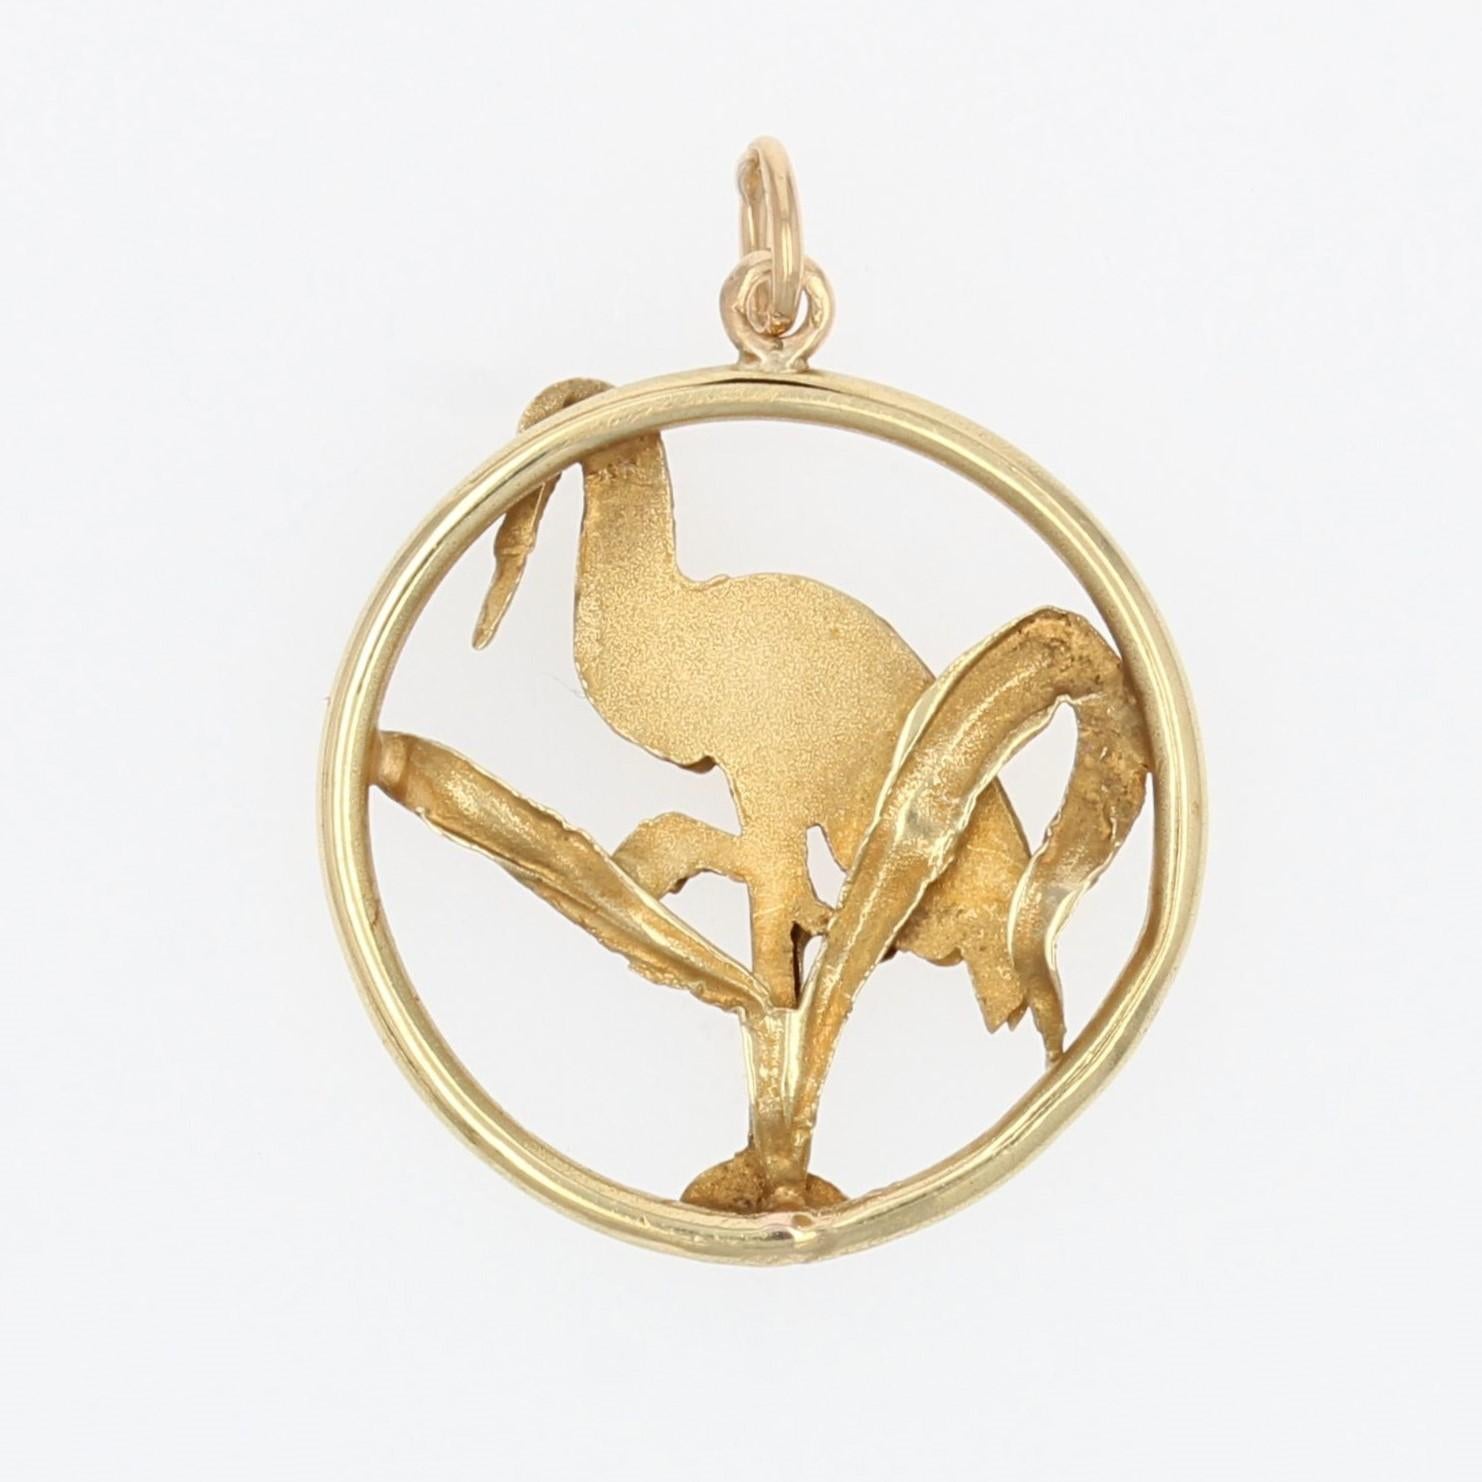 Pendant in 18 karat yellow gold, eagle head hallmark.
Delightful retro pendant, it is of round shape and represents a heron.
Height : 2,4 cm, width : 18,2 mm, thickness : 2 mm approximately.
Total weight of the jewel : 1,1 g approximately.
Authentic